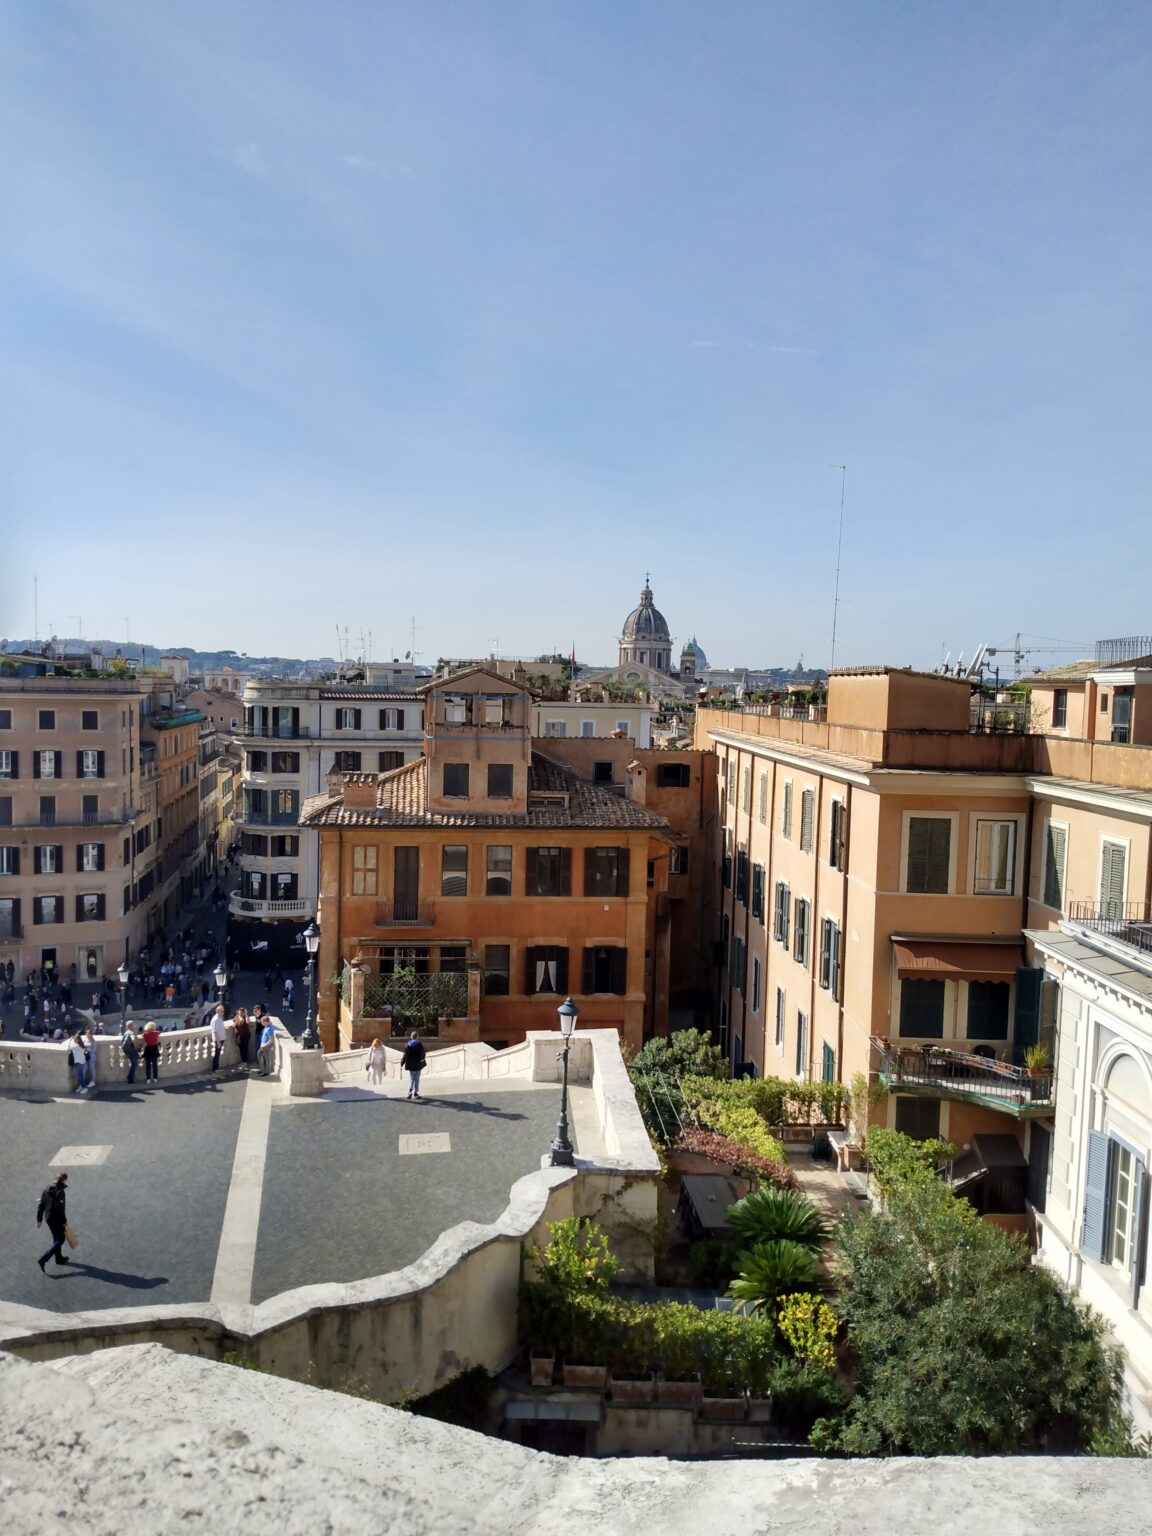 View of Piazza Spagna